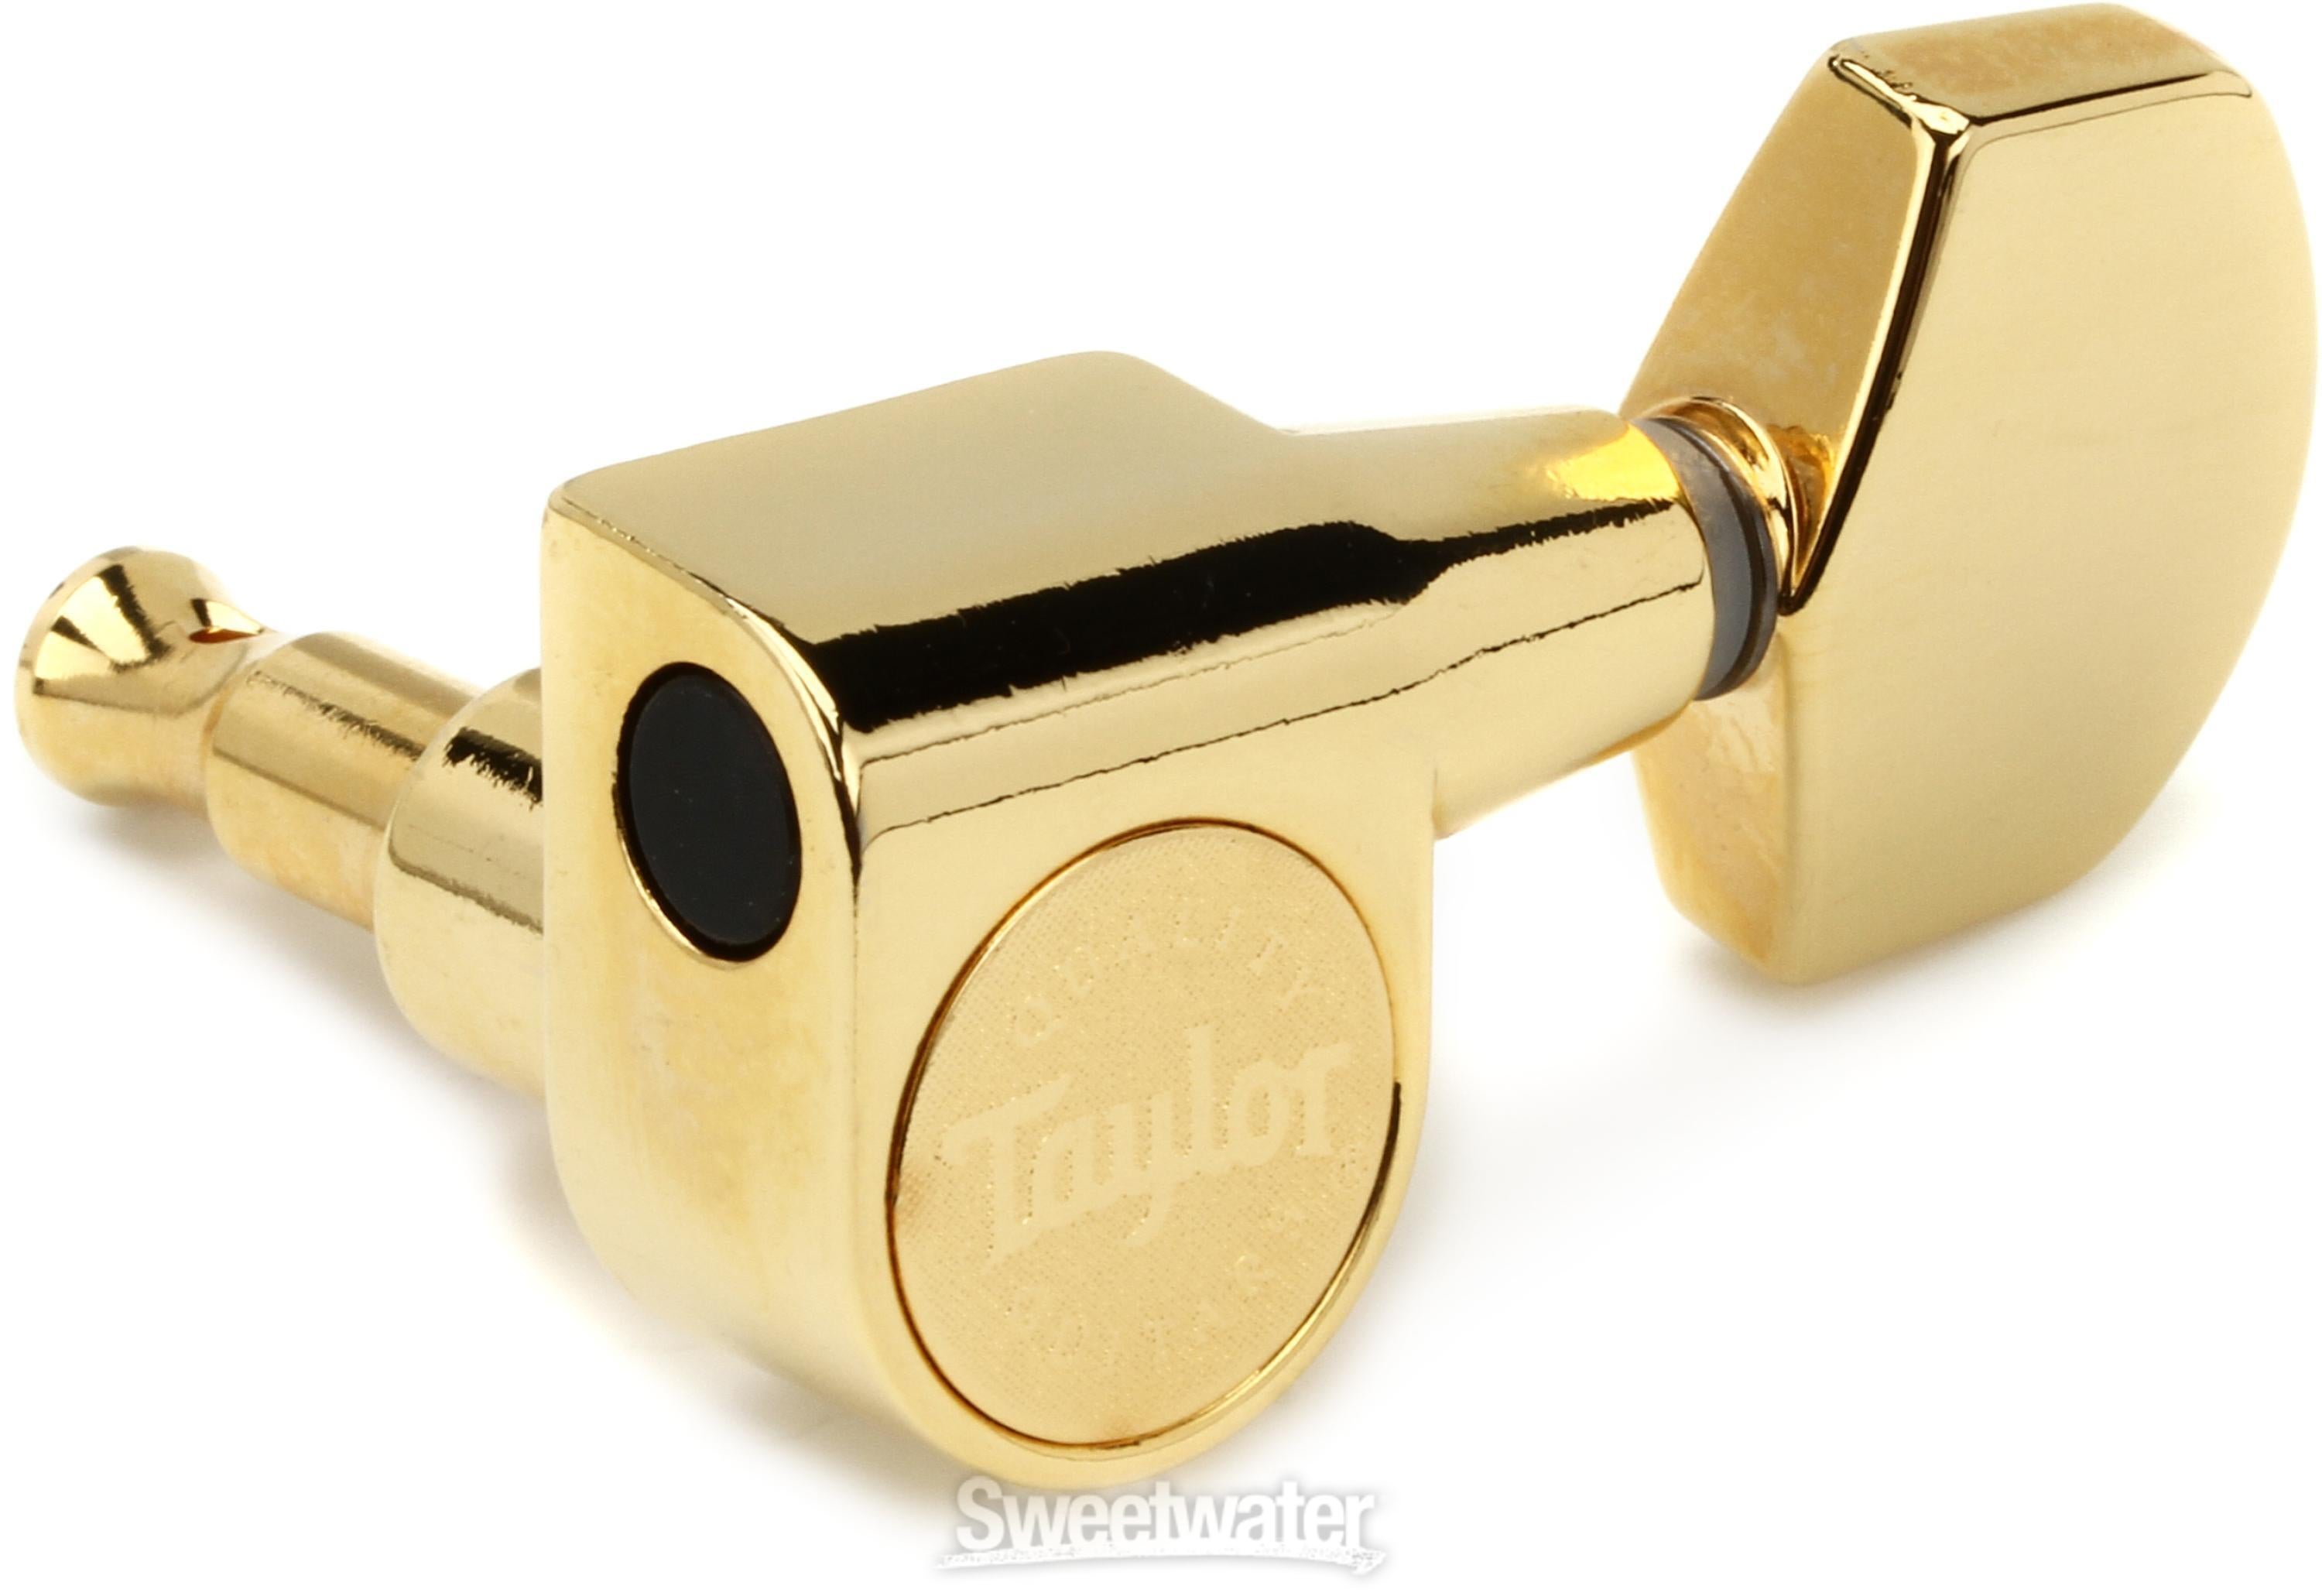 Taylor 6-string Guitar Tuners 1:18 Ratio - Polished Gold | Sweetwater